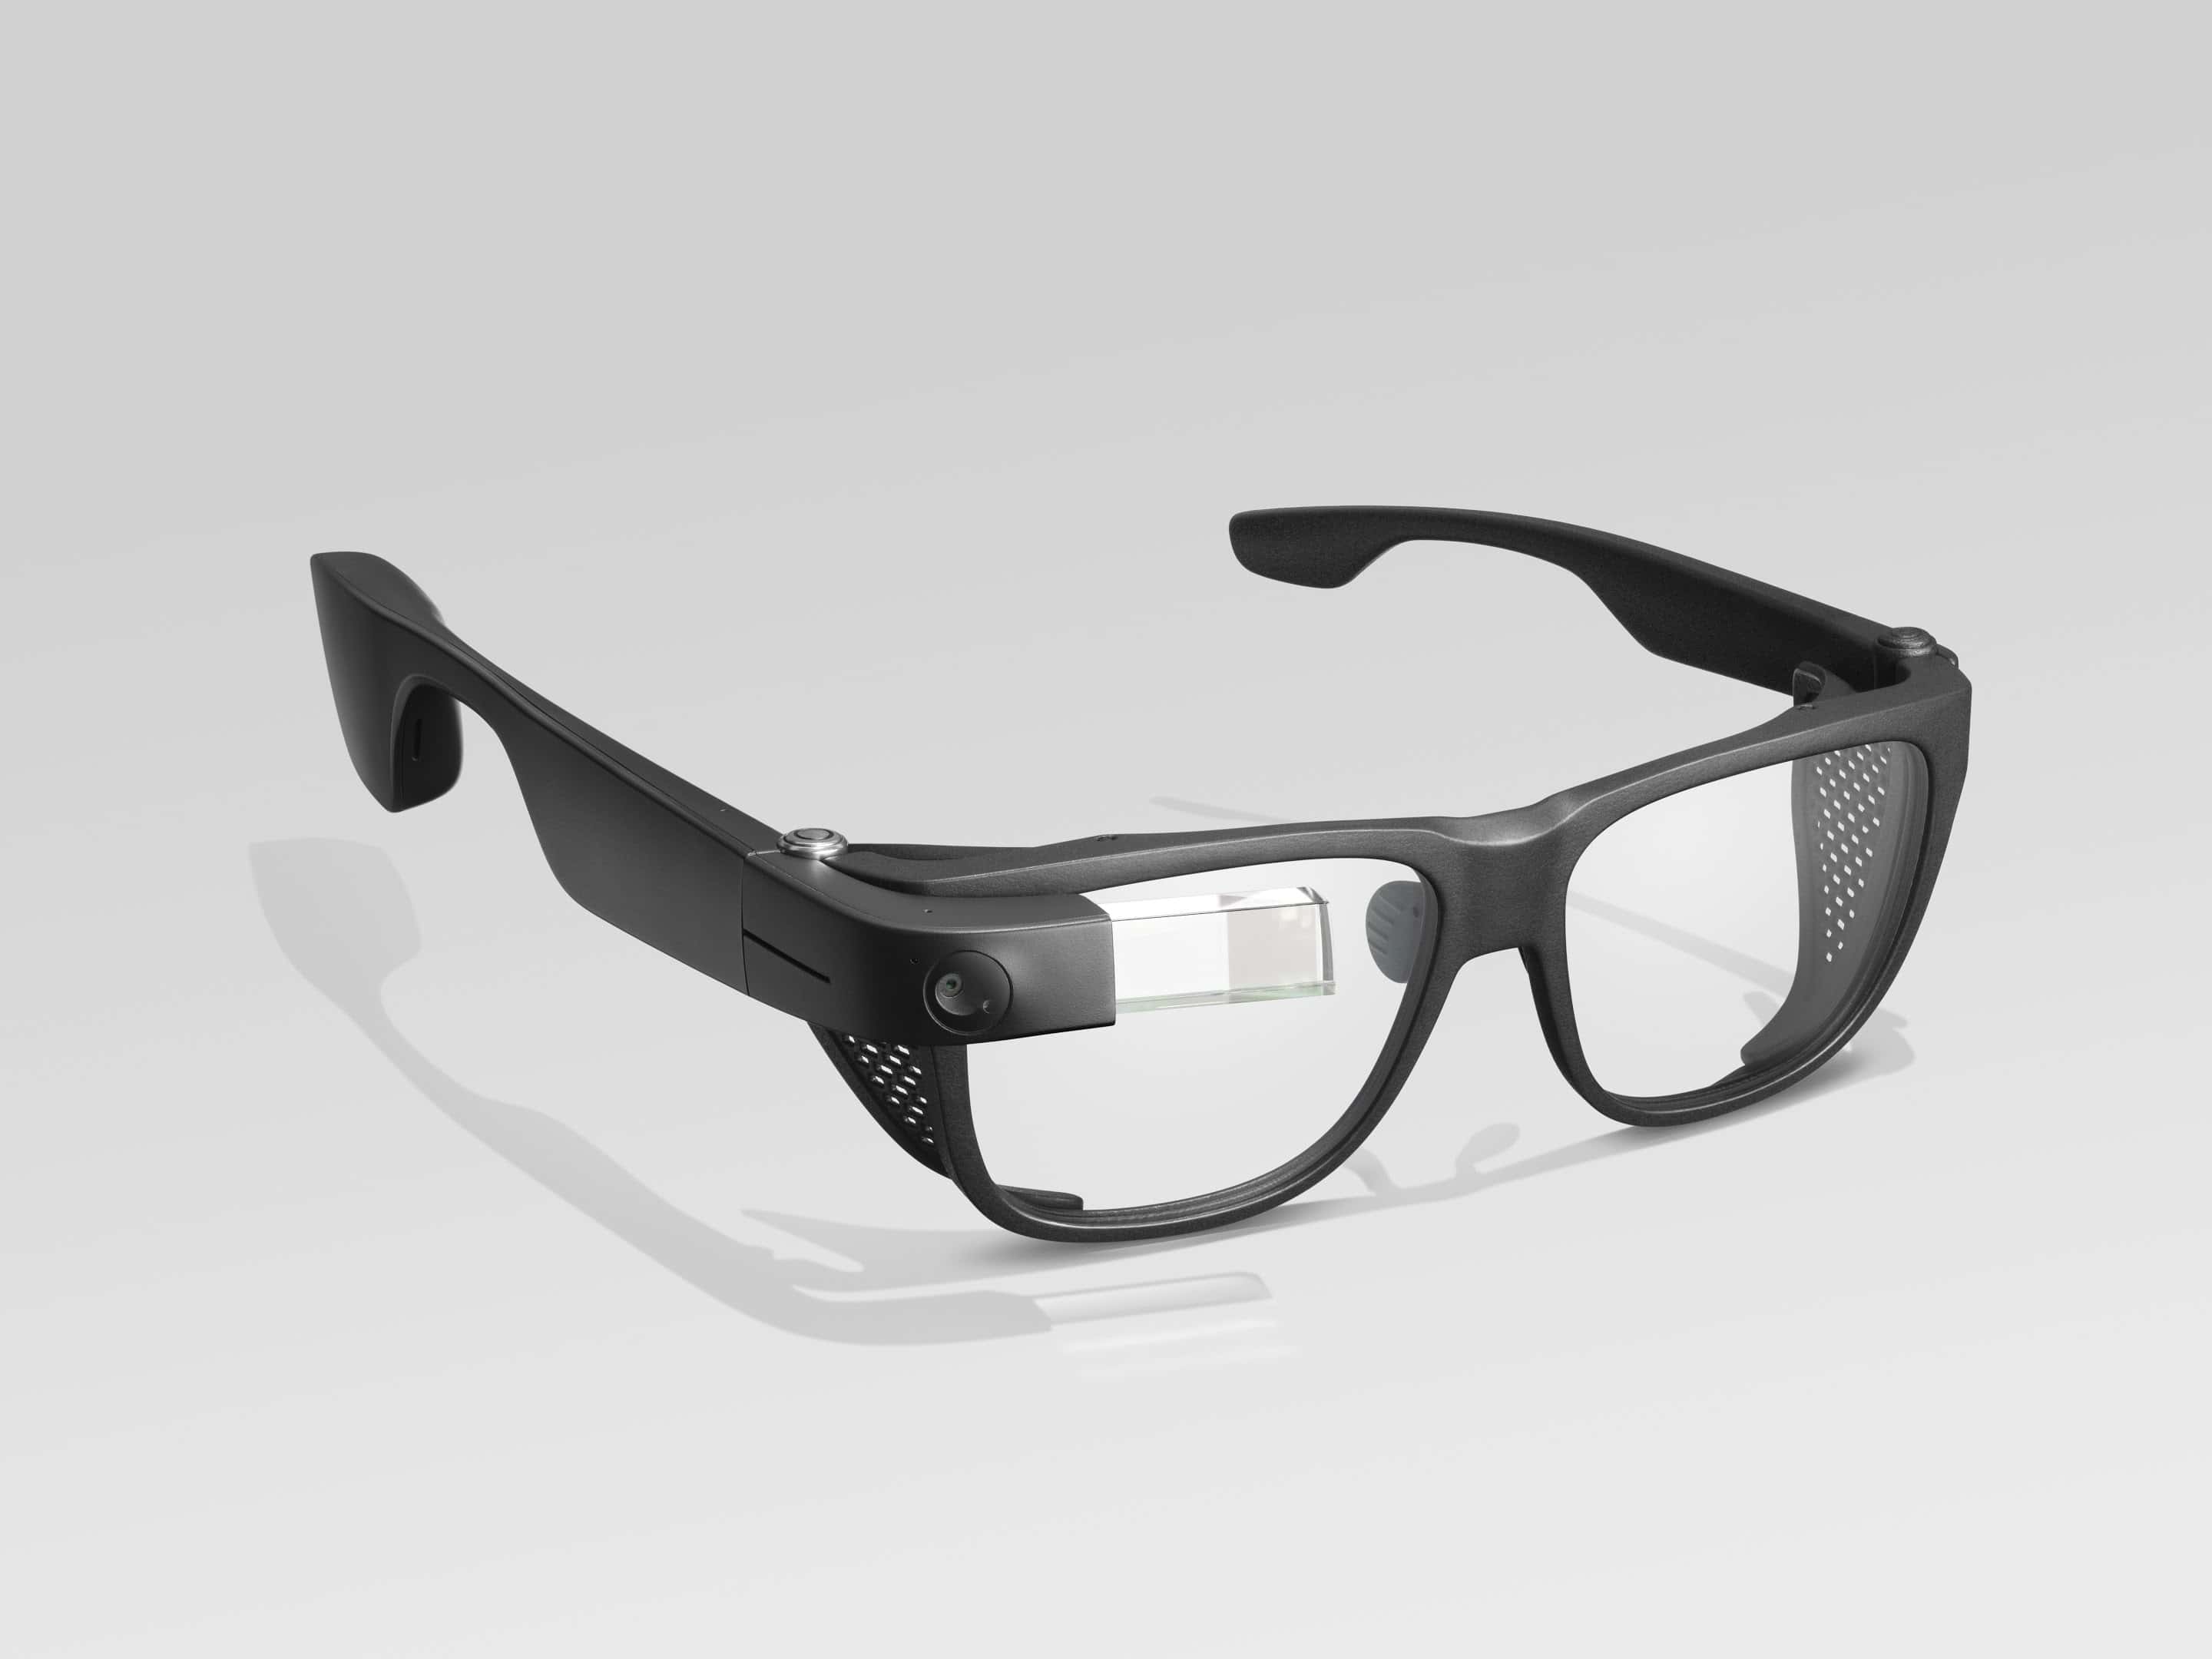 Photo of Envision Glasses with the Smith Optics frames; the frames are black plastic, 2 or 3 times thicker than the titanium frames